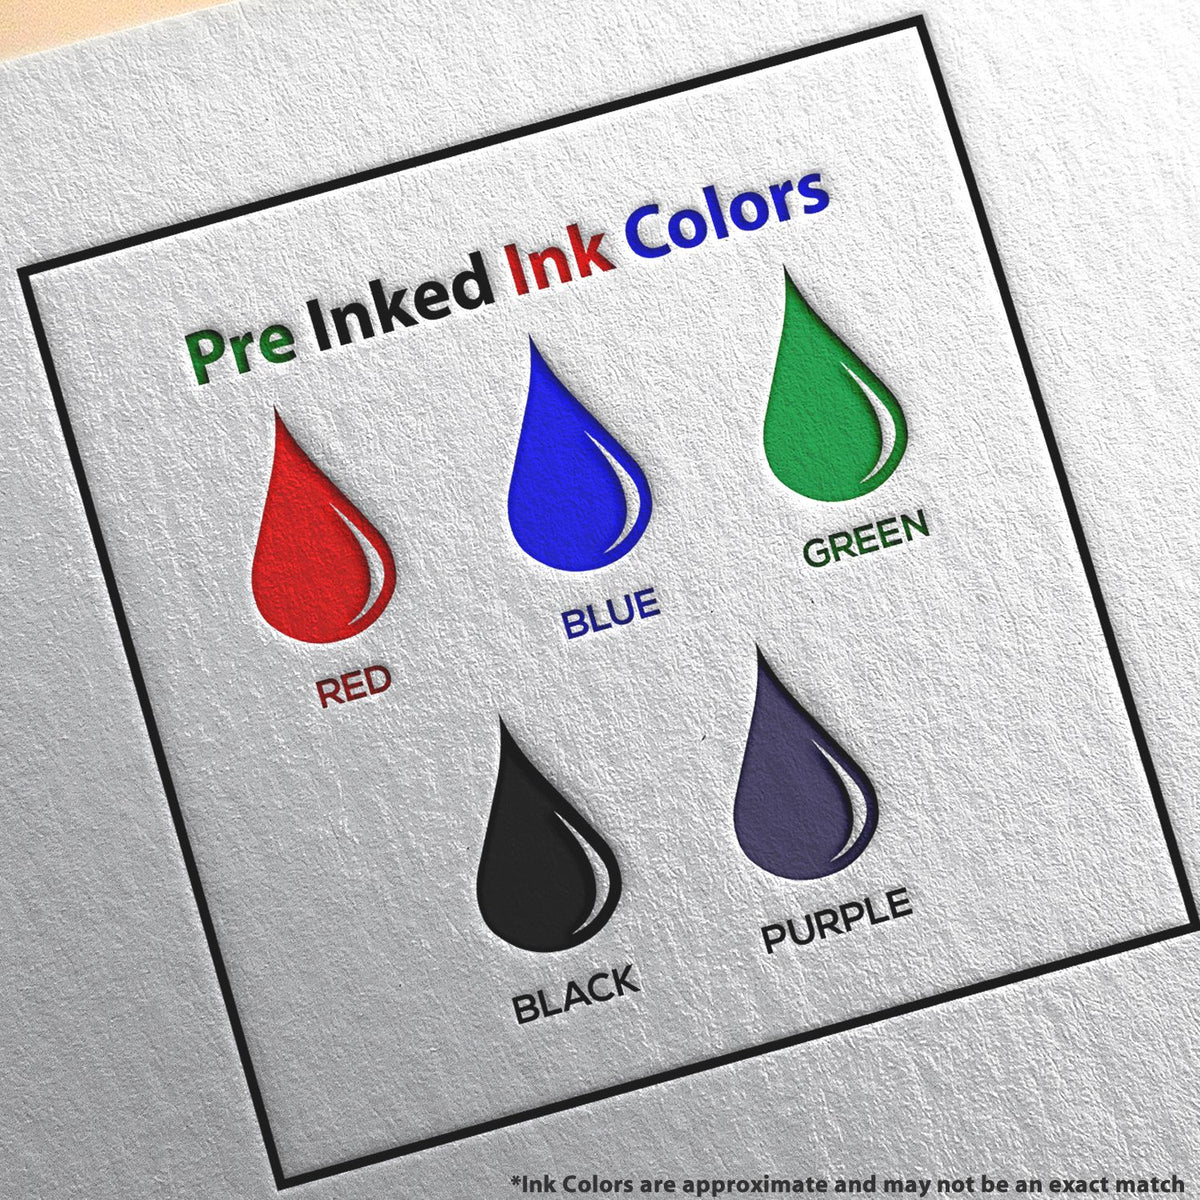 A picture showing the different ink colors or hues available for the PSI Kentucky Notary Stamp product.